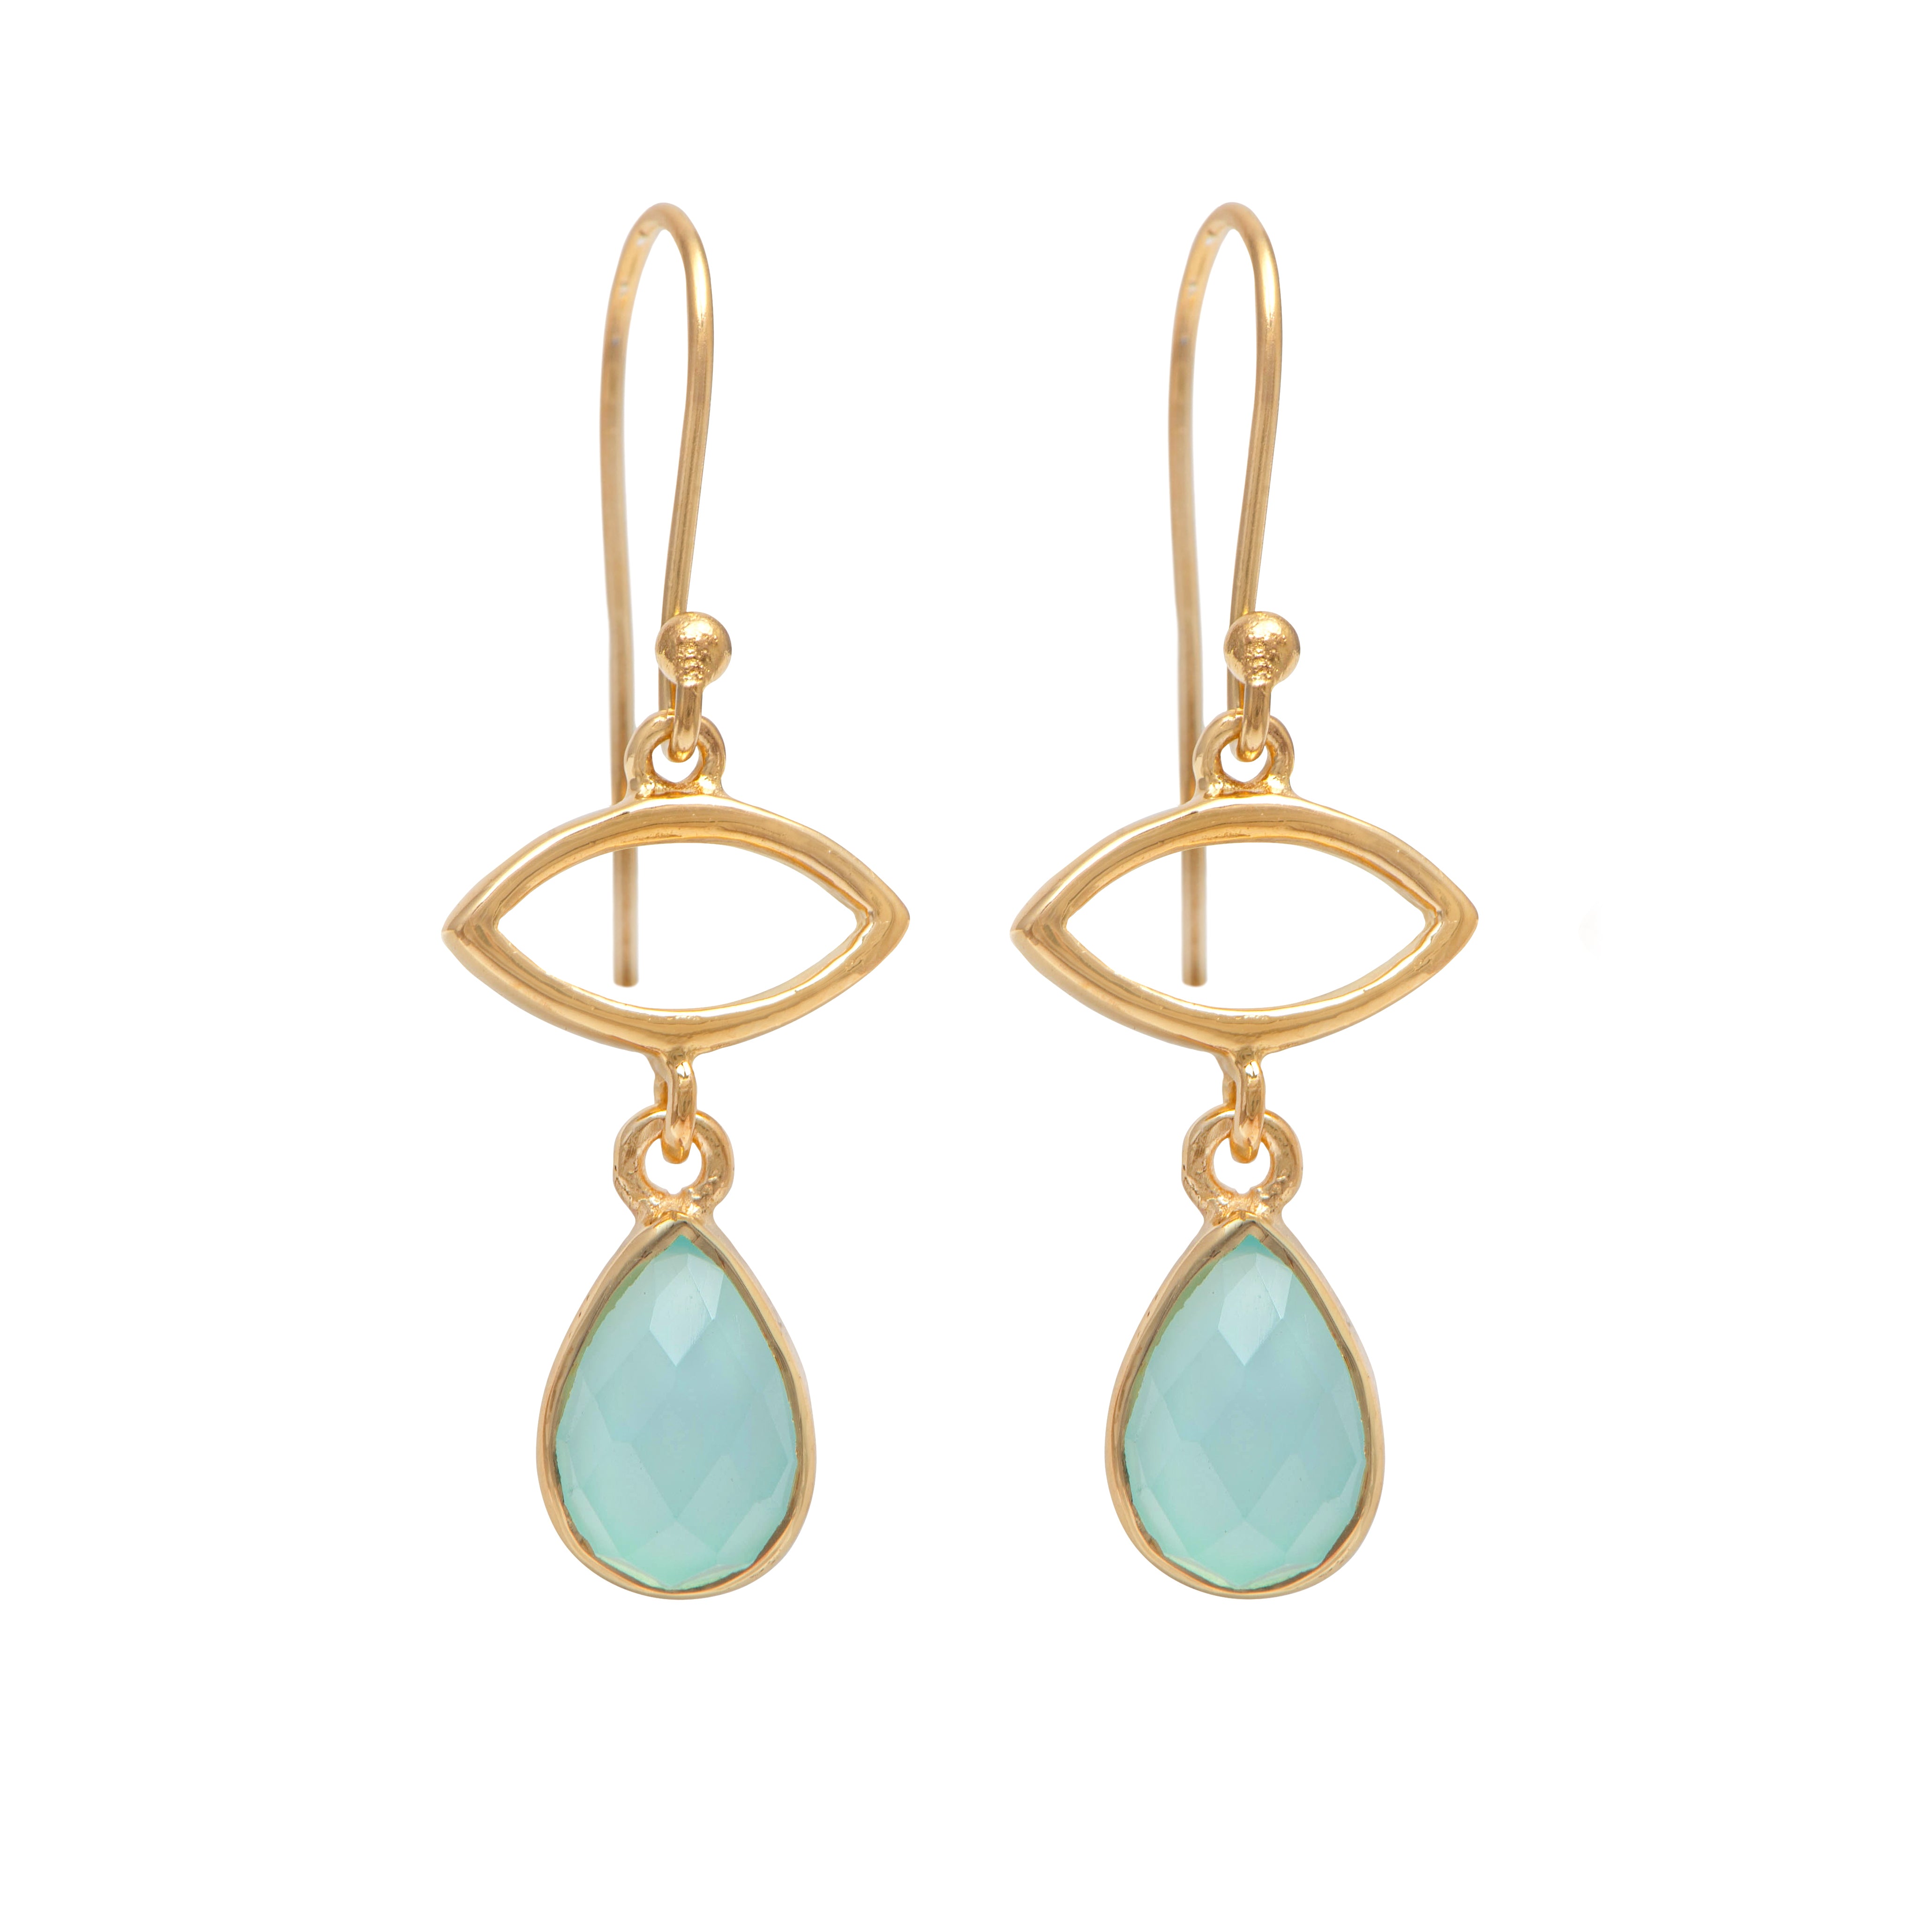 Gold Plated Drop Earrings with Aqua Chalcedony Gemstone